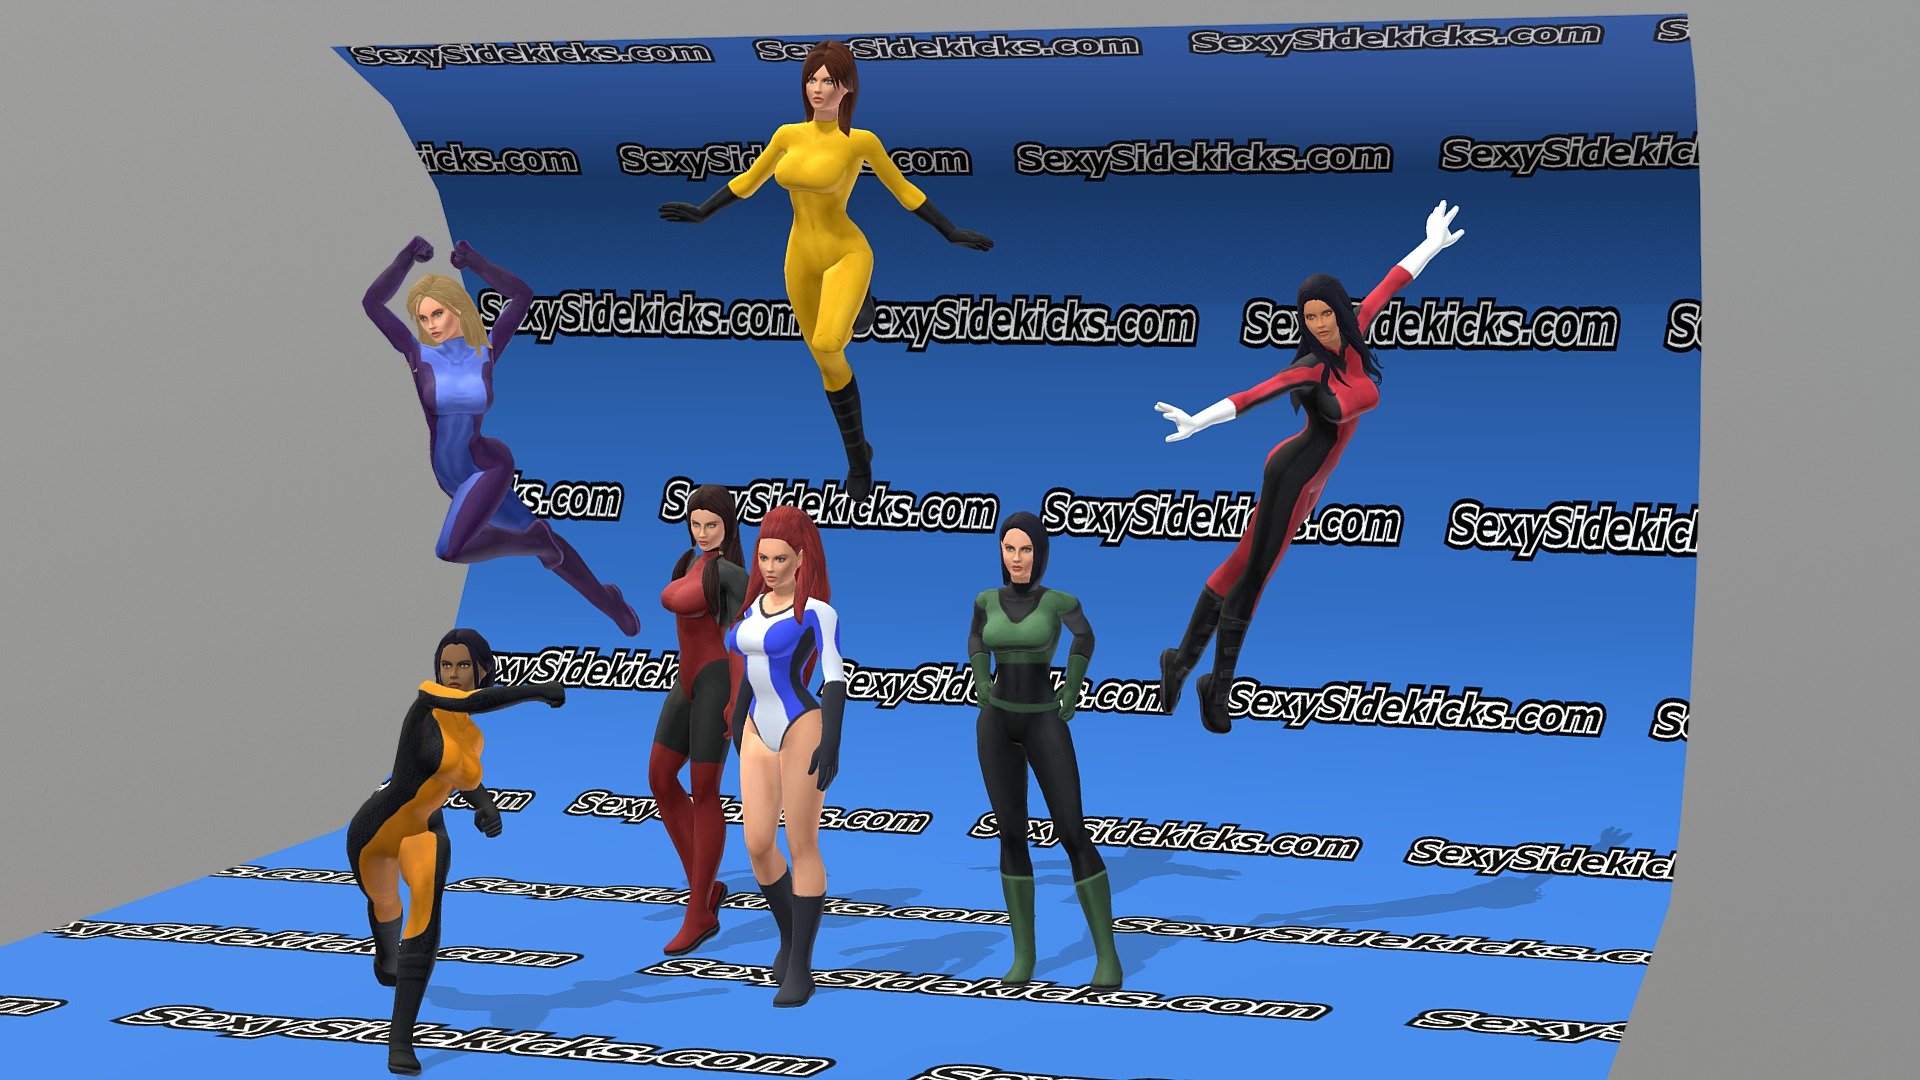 The Superhero Females0-7 Construction Kit includes:
        42 female superhero animations
        8 female outfits
        30 female hairstyles
        PSD layers for changing haircolor, eye color, faces, skin color
        PSD layers for outfits, so you can mix and match


    Note:this kit is also part of a larger kit which can be found here...https://skfb.ly/6yuqU
 - Superhero Construction Kit Classic Females0-7 - Buy Royalty Free 3D model by rungy 3d model